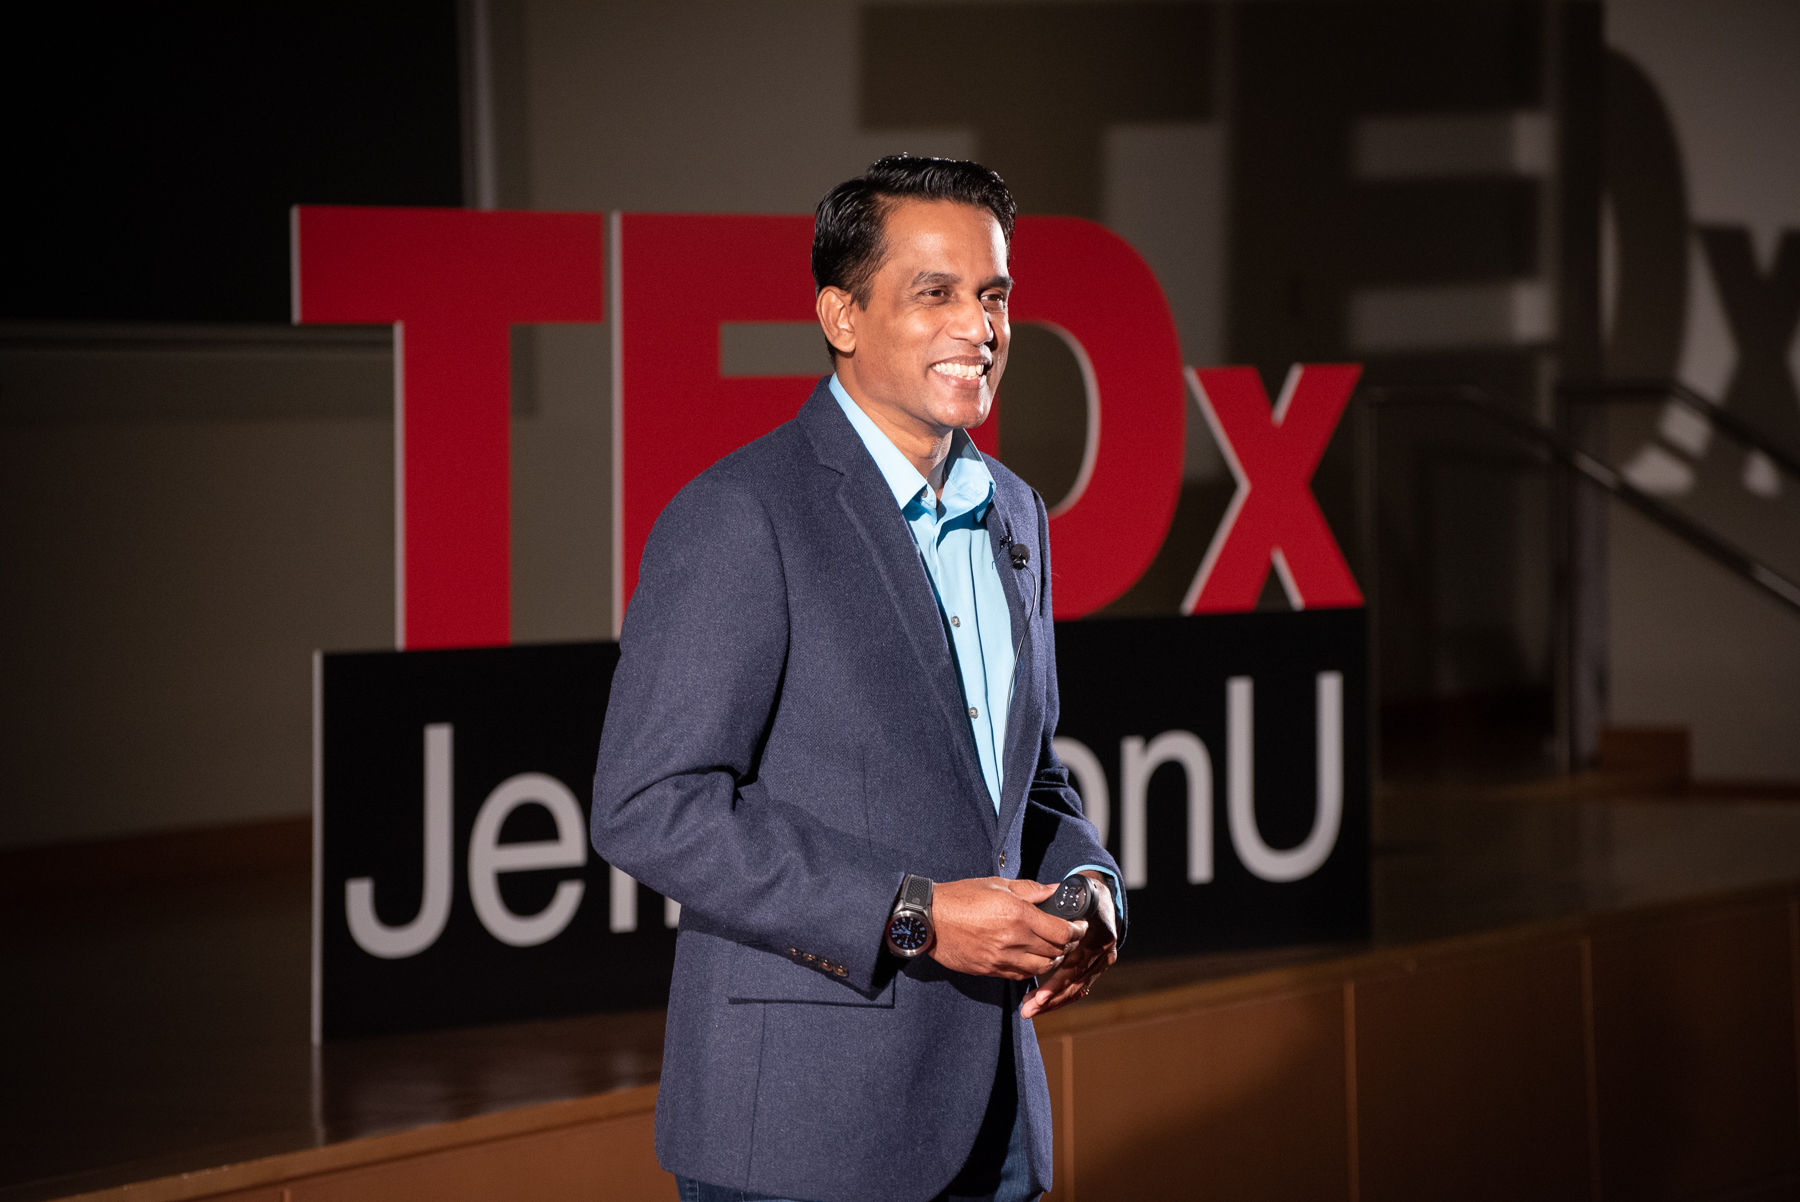 Neil Gomes, Jefferson’s chief digital officer, presented on 